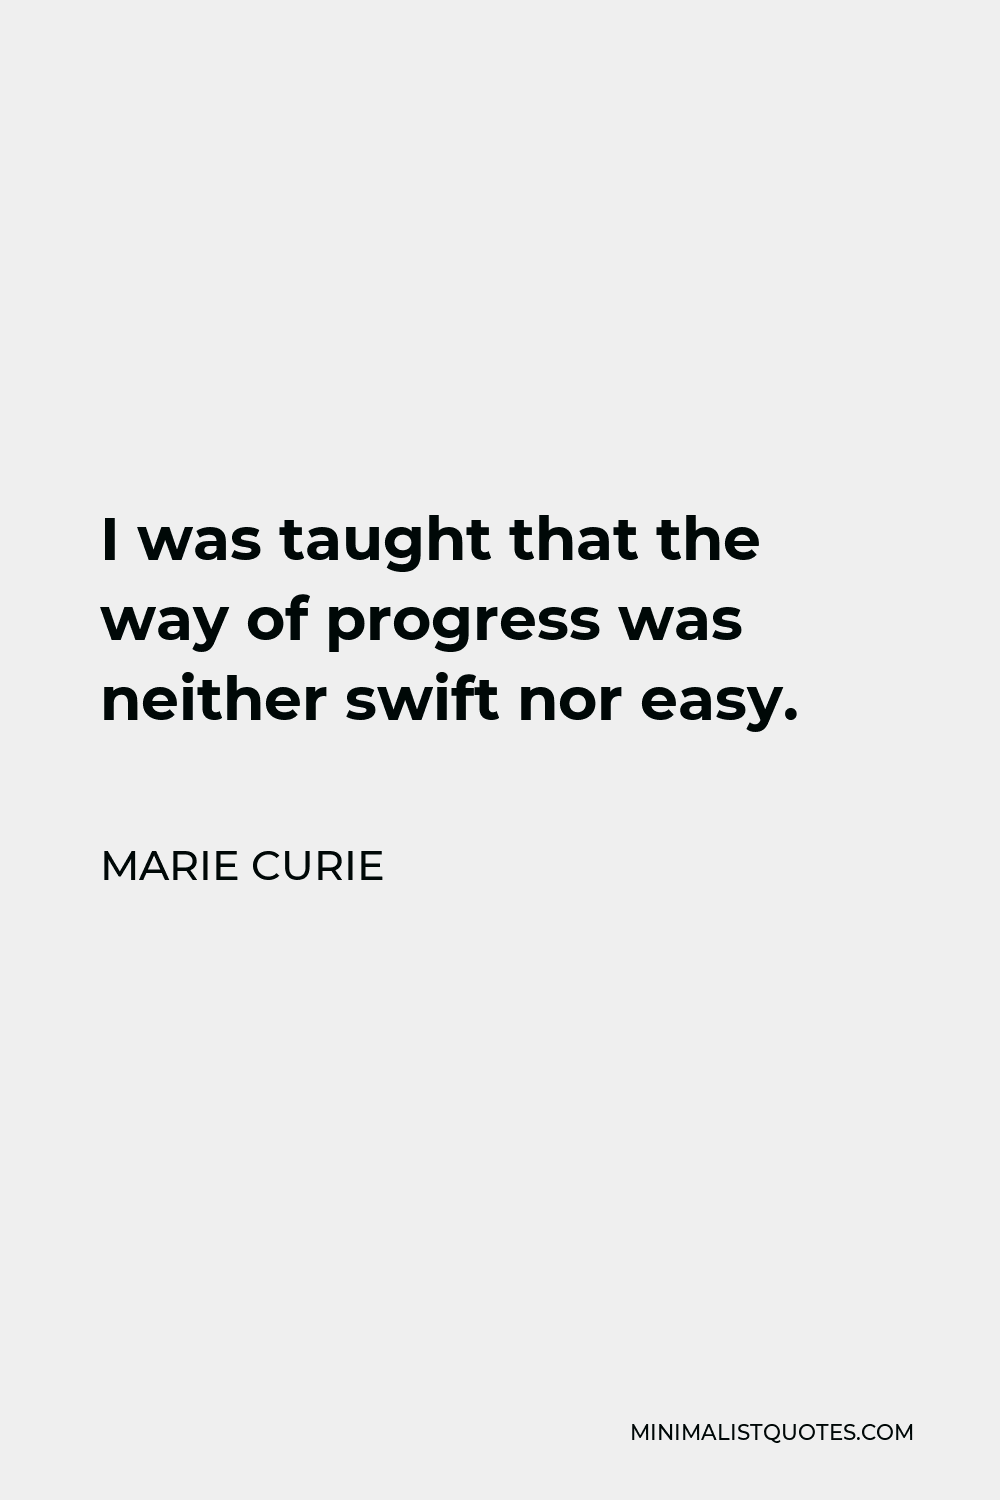 Marie Curie Quote - I was taught that the way of progress was neither swift nor easy.